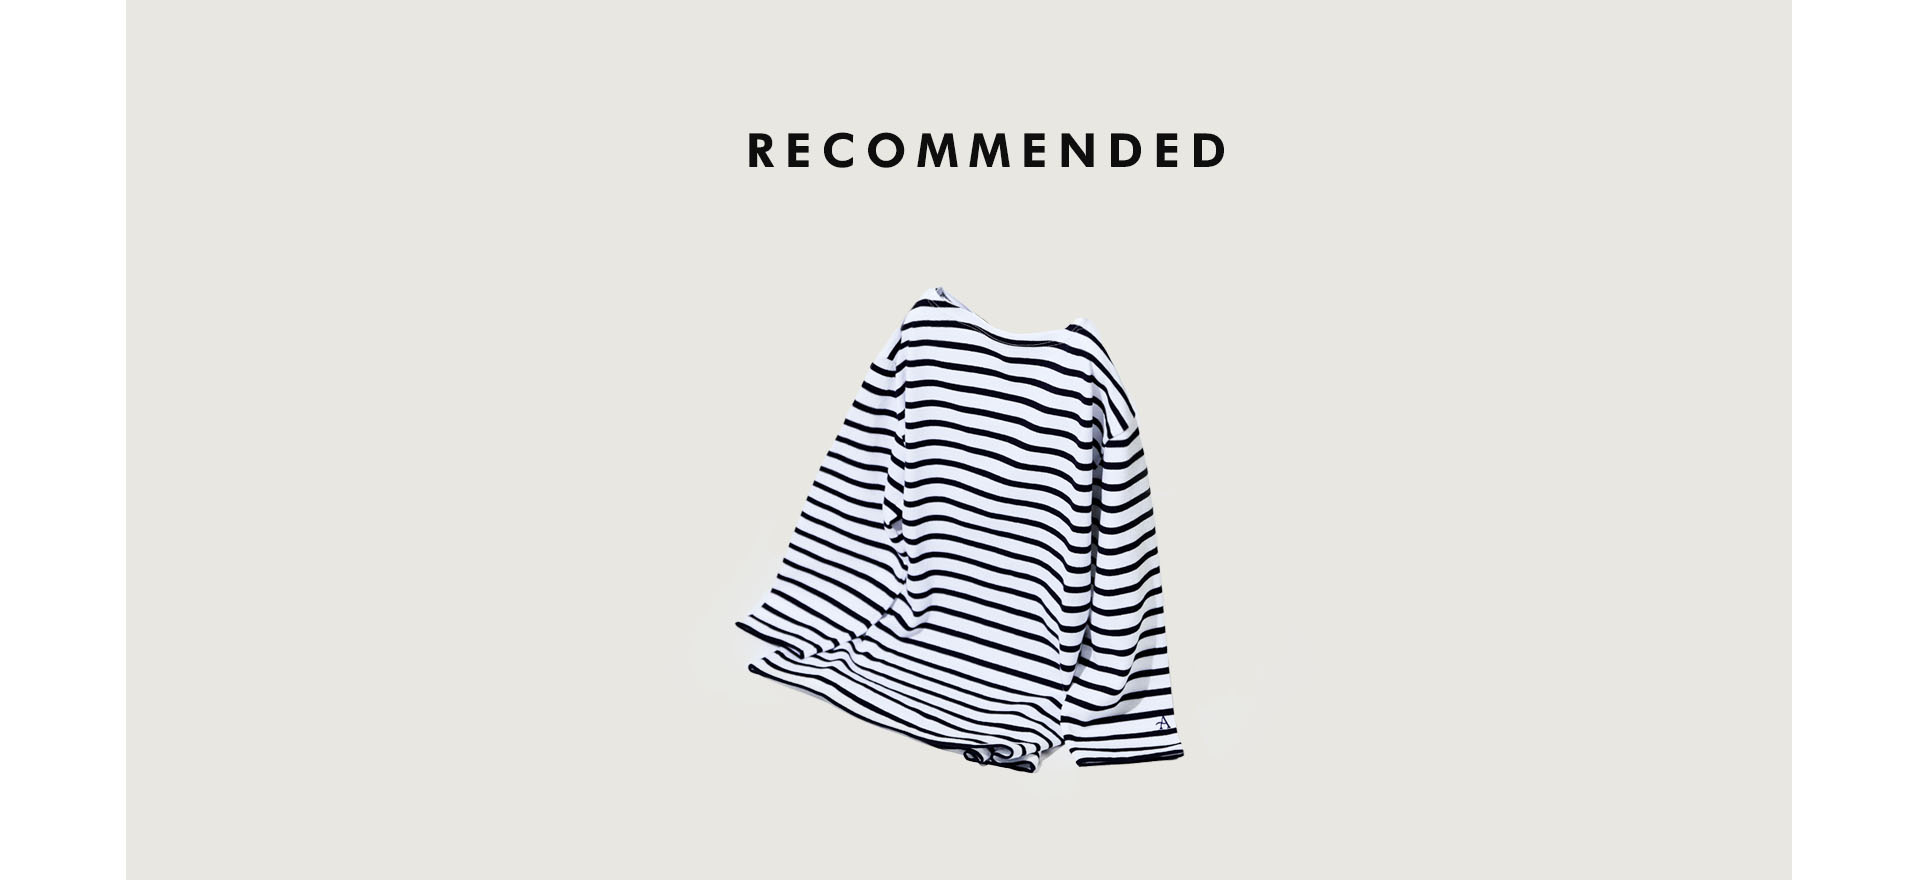 RECOMMENDED ITEM